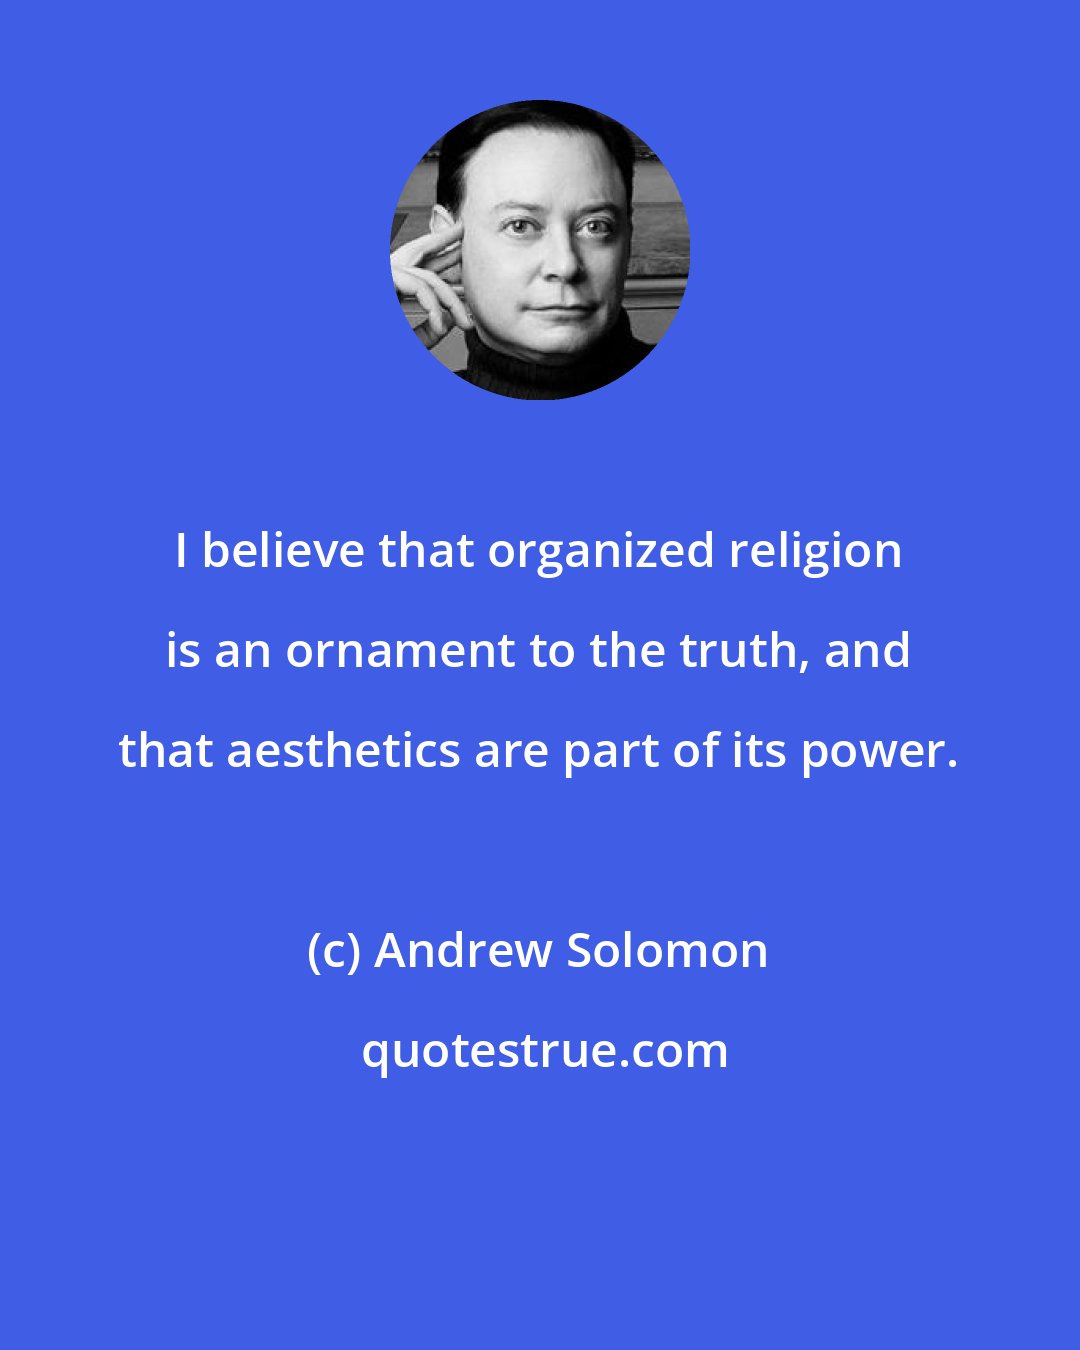 Andrew Solomon: I believe that organized religion is an ornament to the truth, and that aesthetics are part of its power.